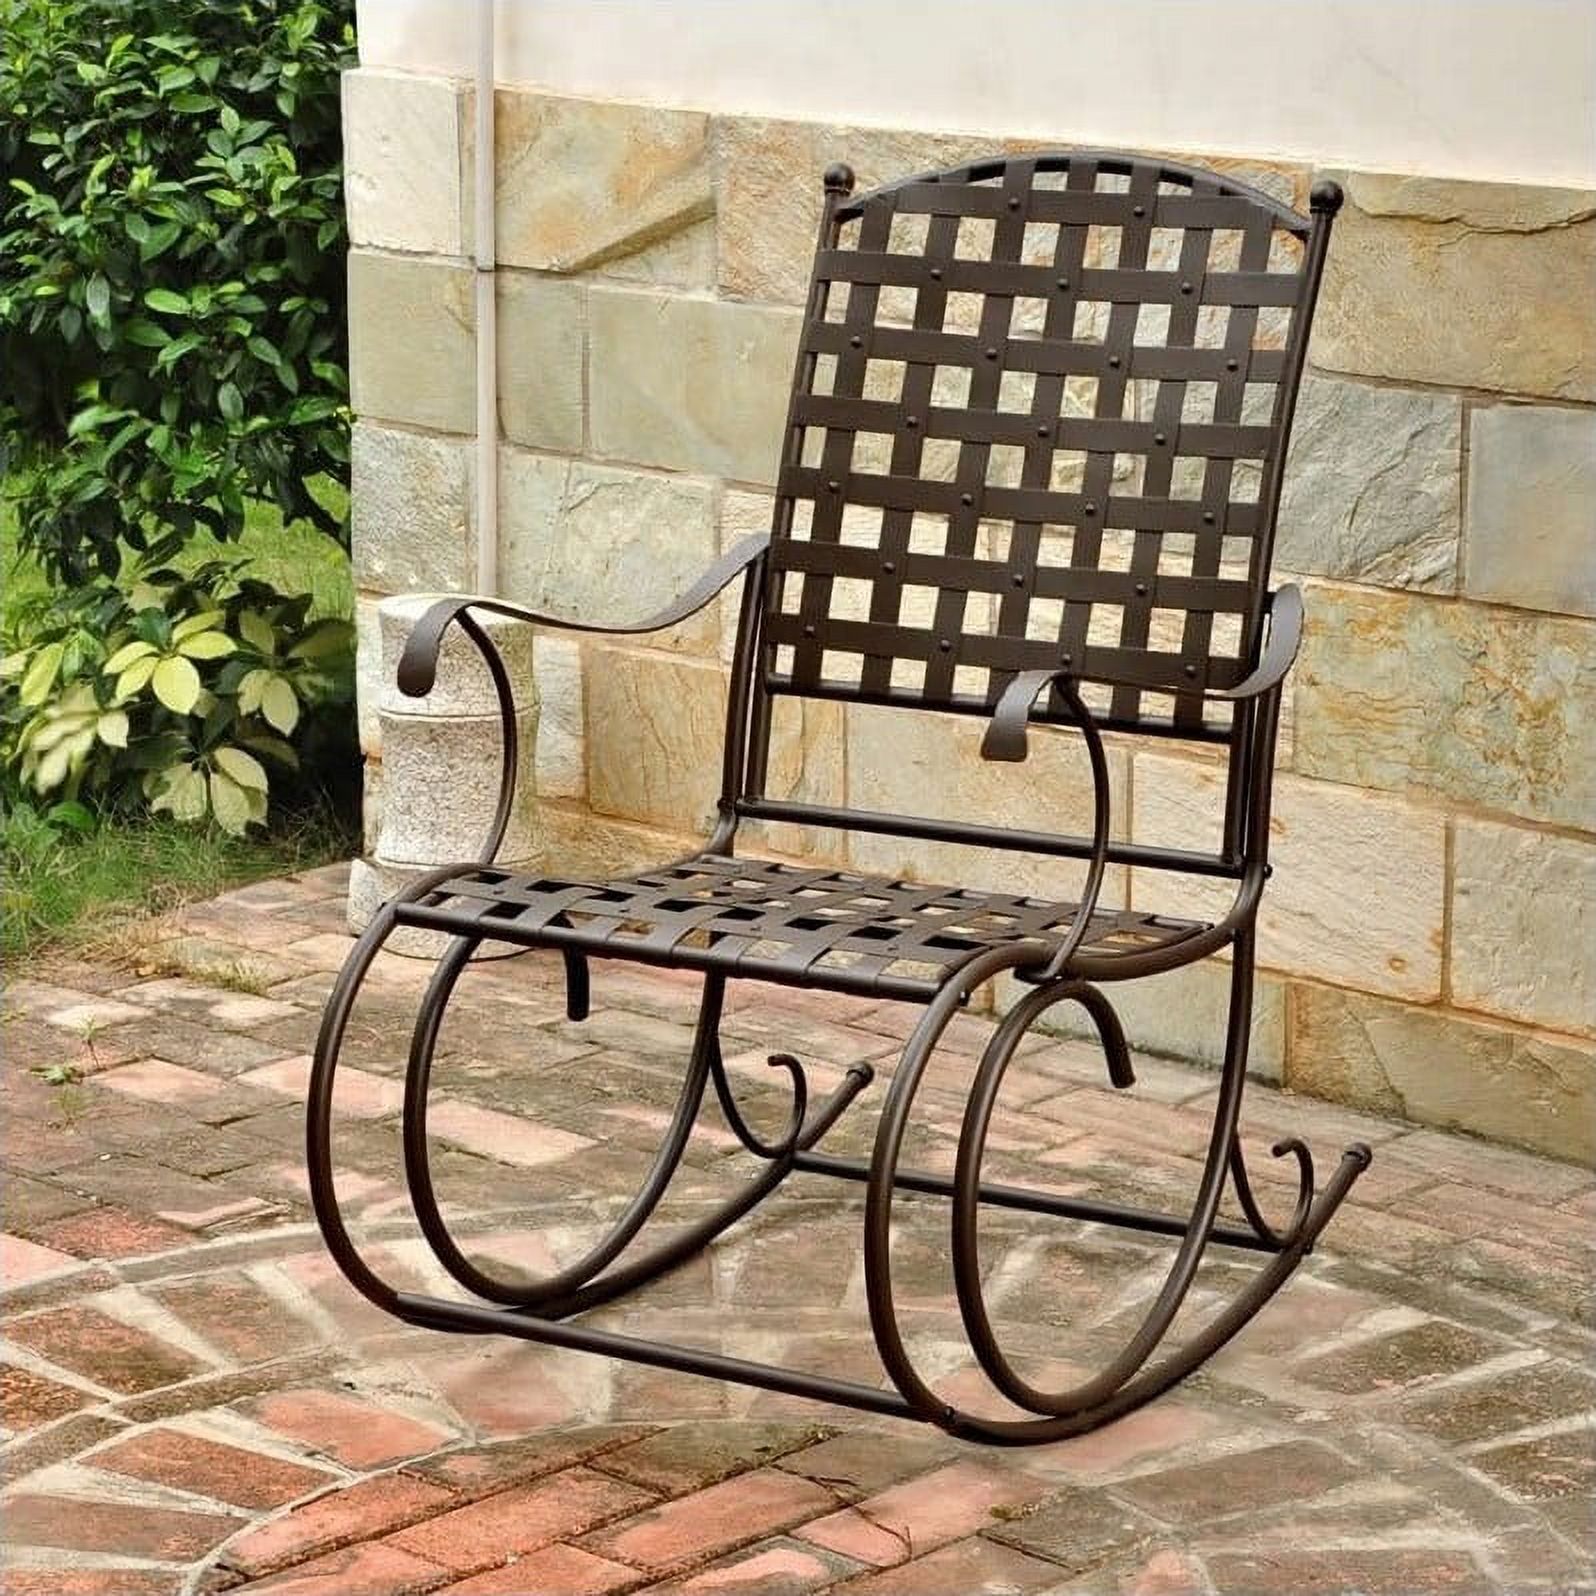 Pemberly Row Iron High-Back Patio Rocker in Brown - image 1 of 2